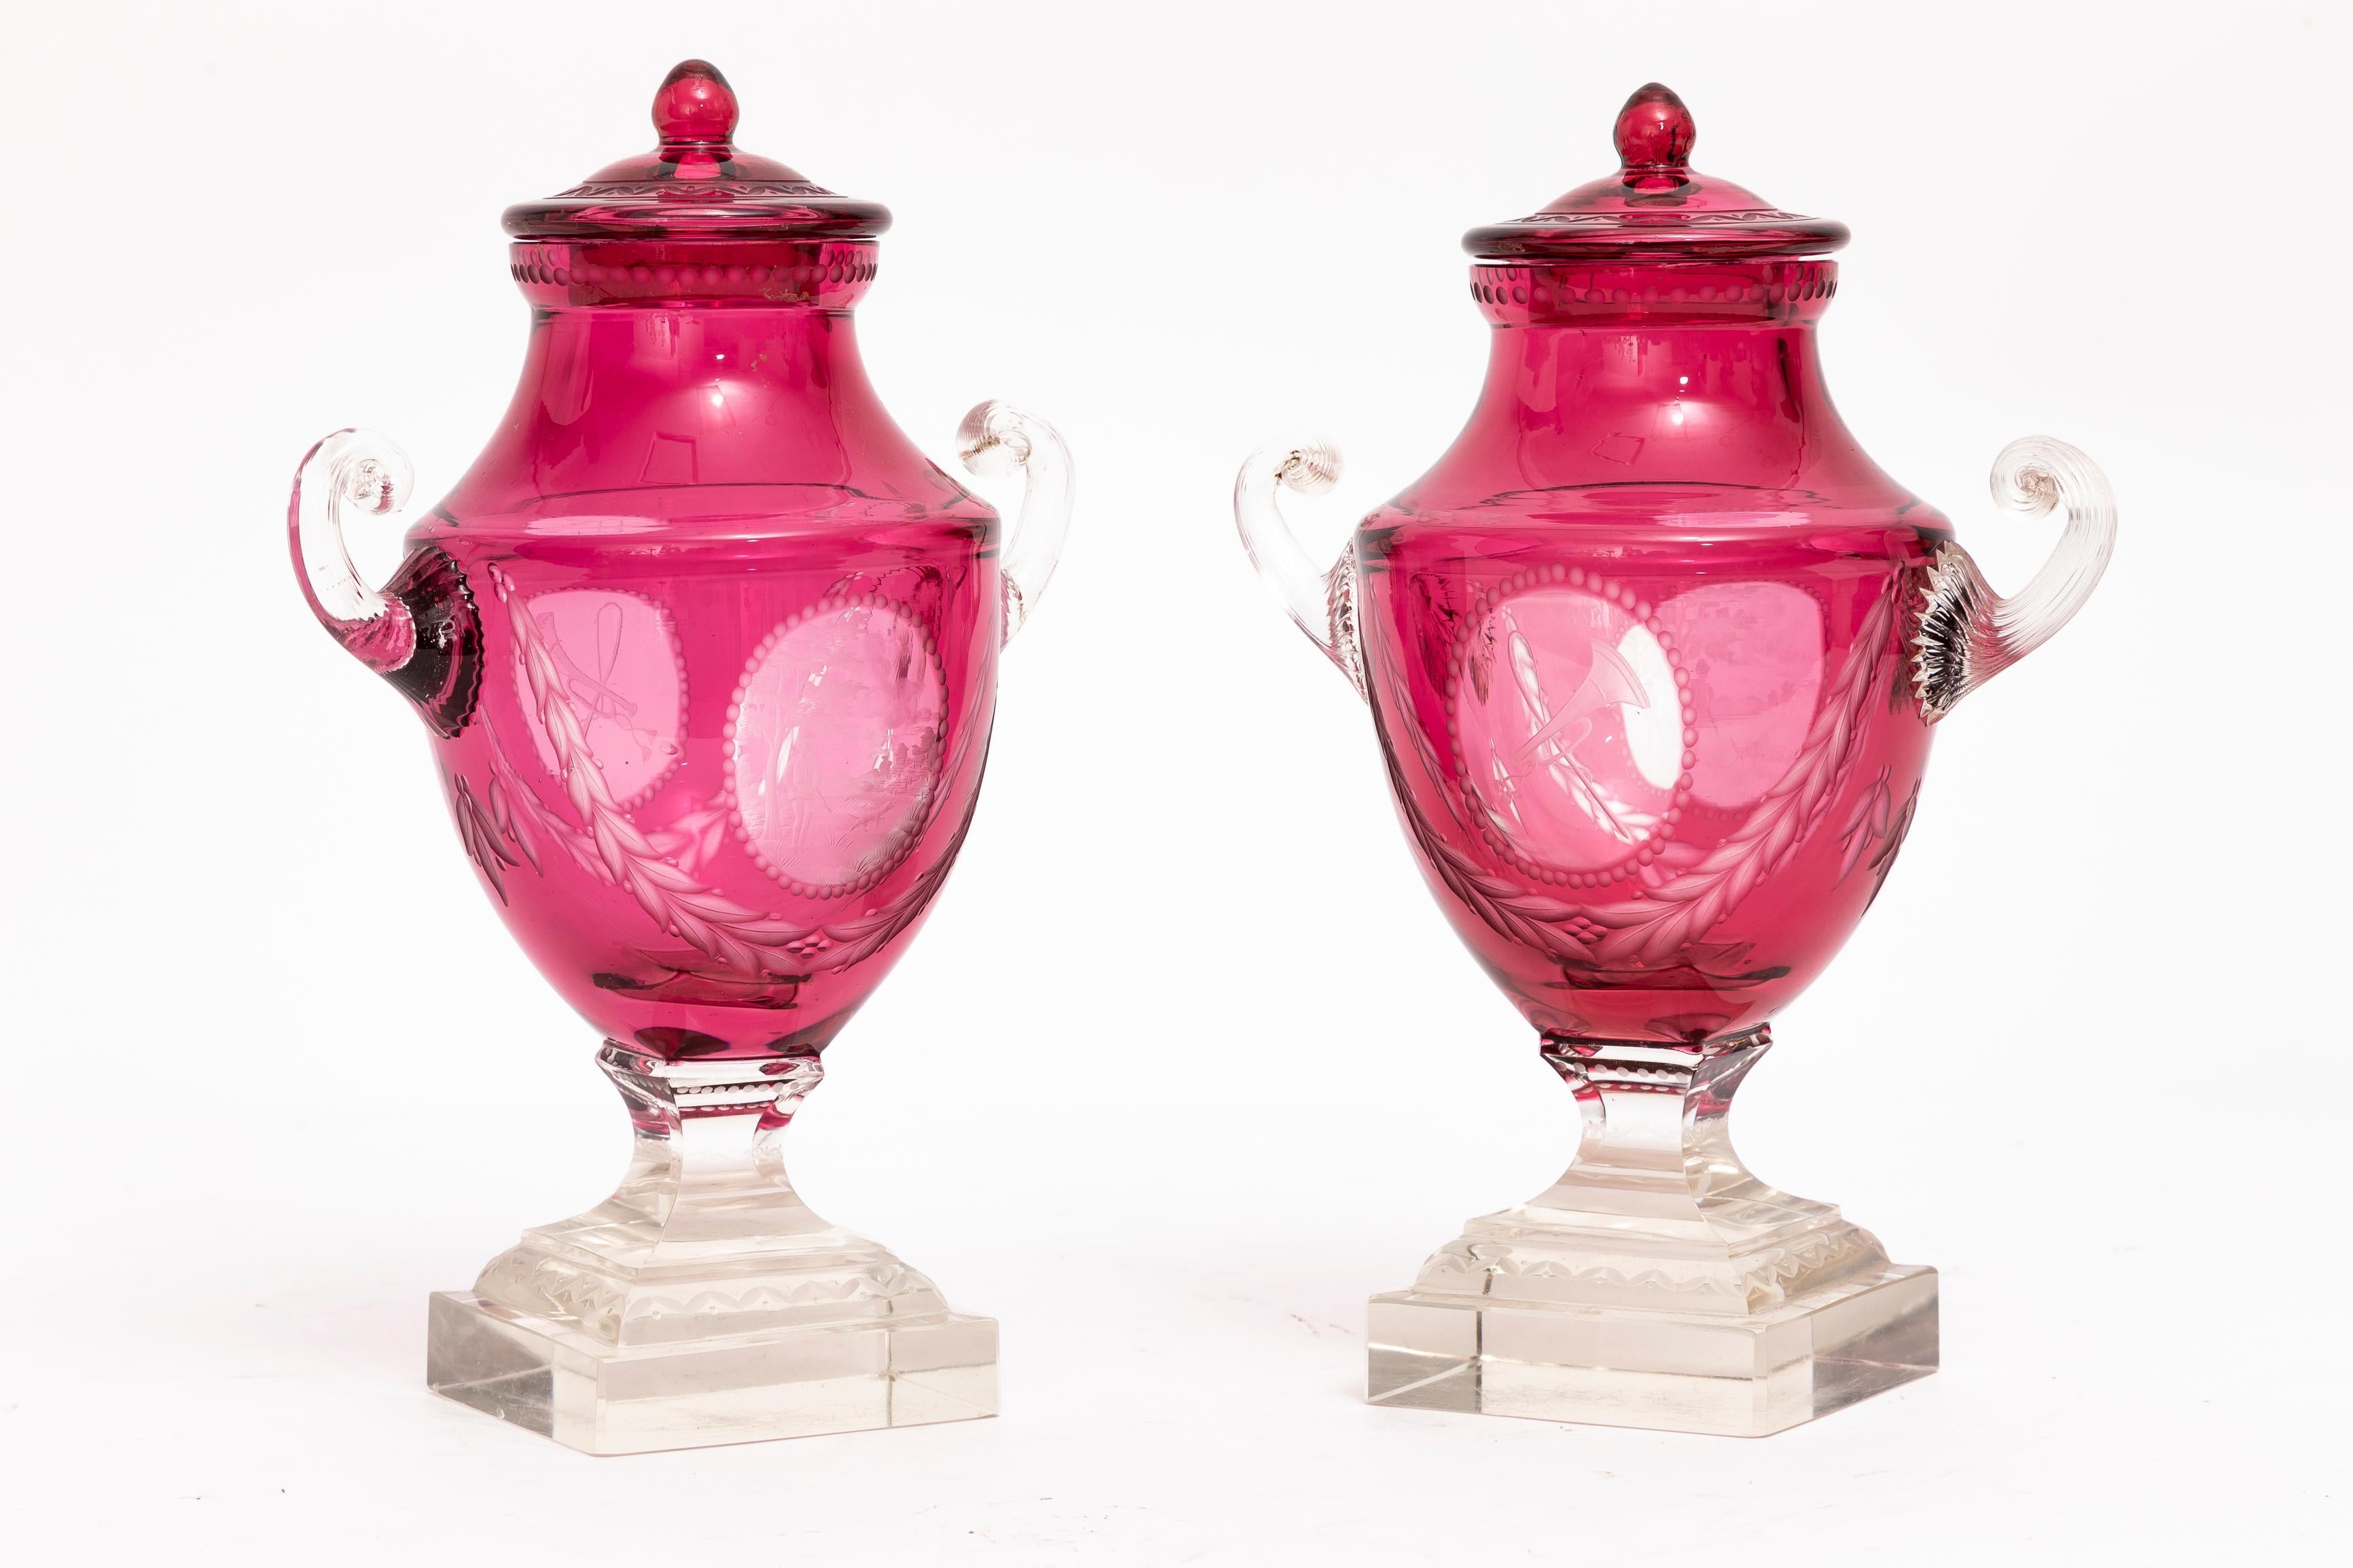 A Magnificent Pair of Covered Crystal Double Overlay Cranberry Cut-to-Clear Hunting Trophy Vases with applied shell handles and stepped bases, Attributed to Baccarat. These vases are characterized by their rich cranberry hue, meticulously etched and